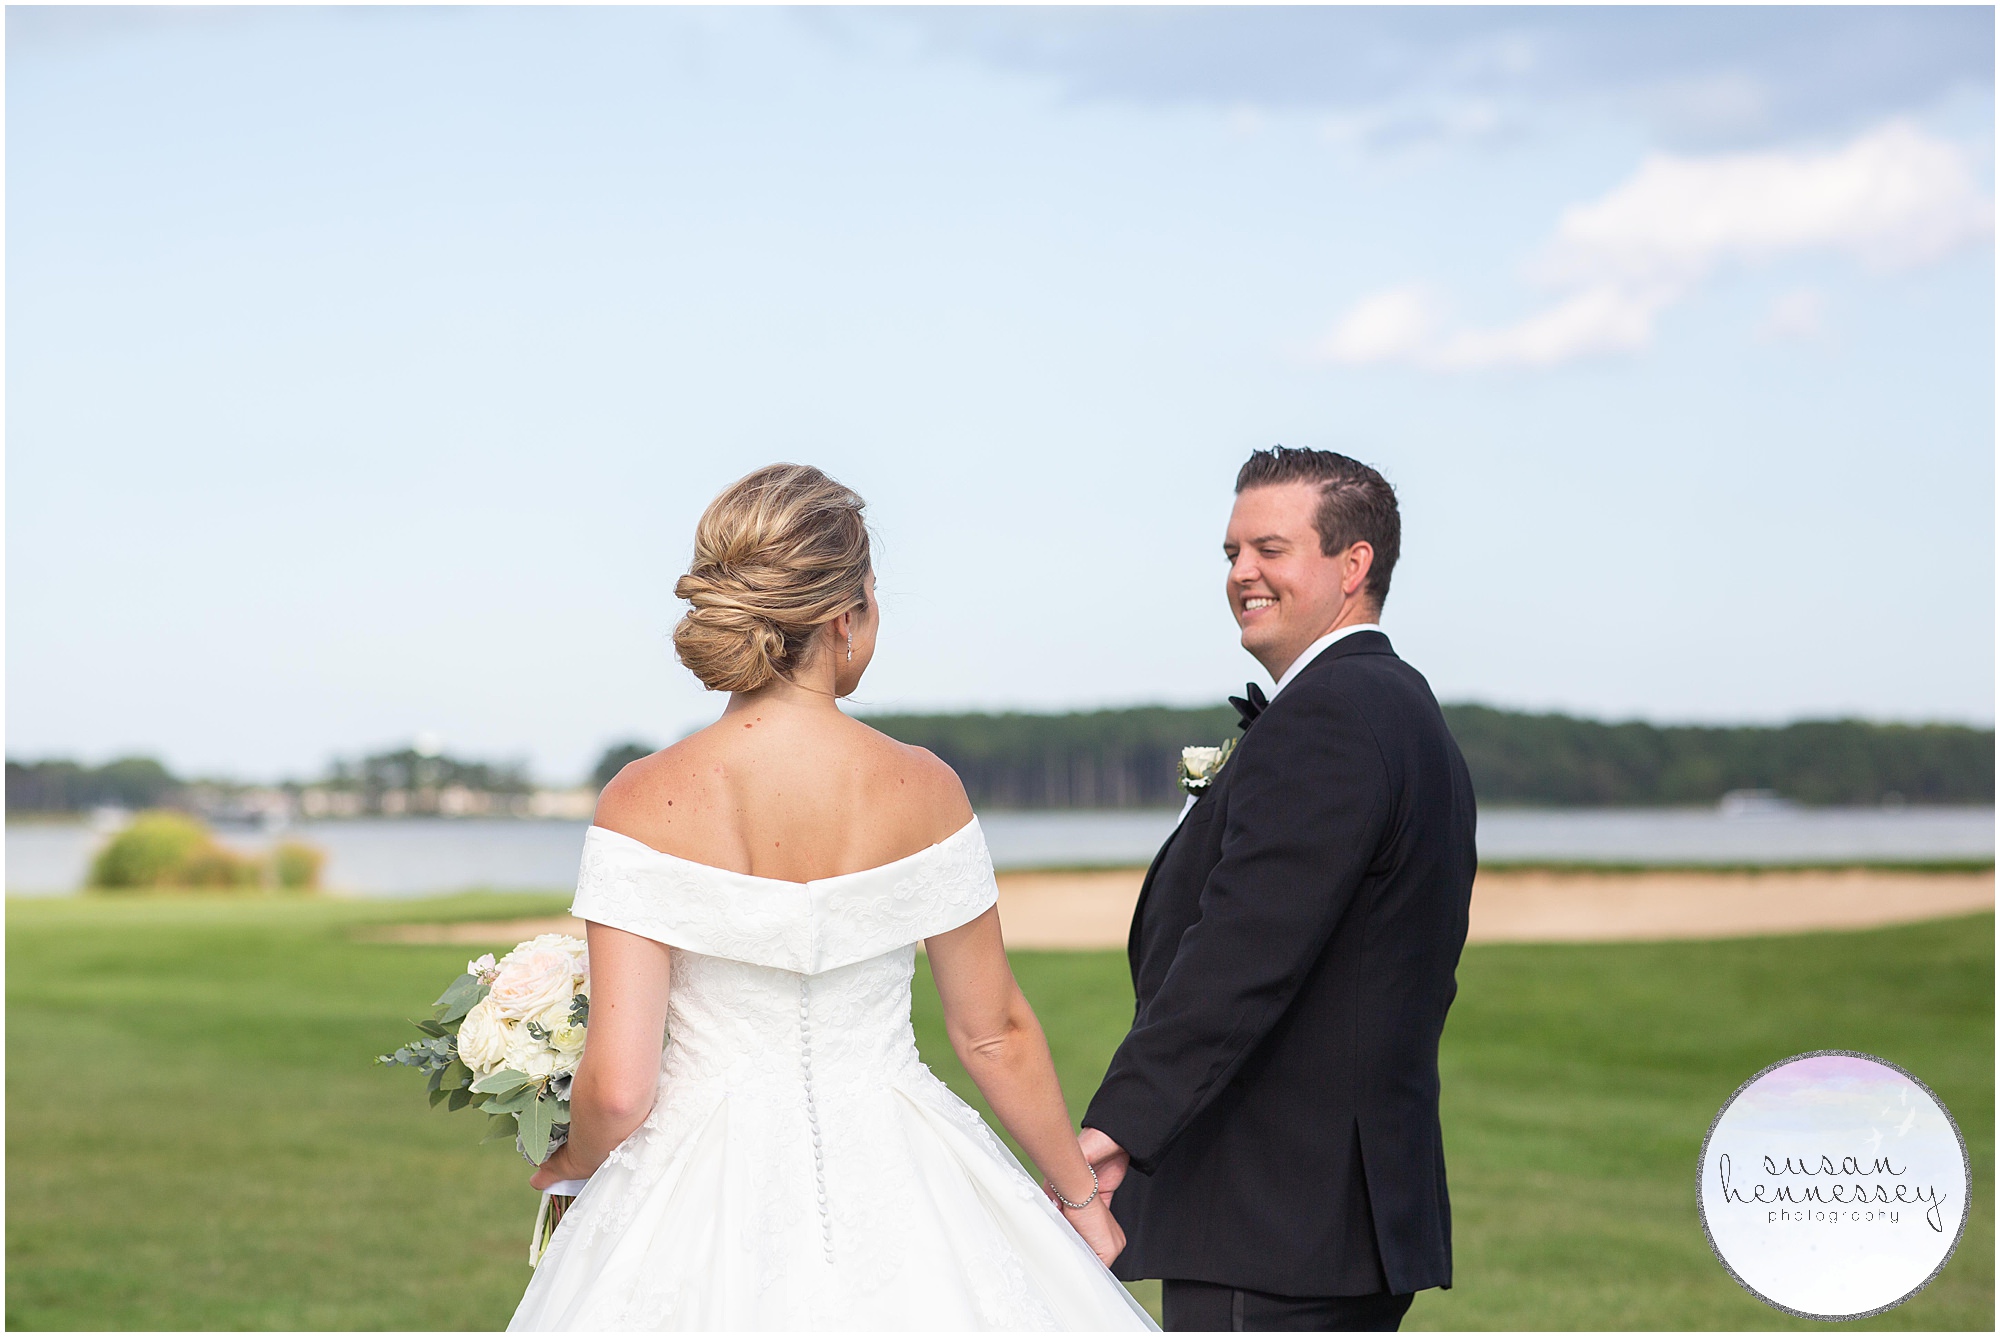 A bride and groom on waterfront golf course in Rehoboth Beach